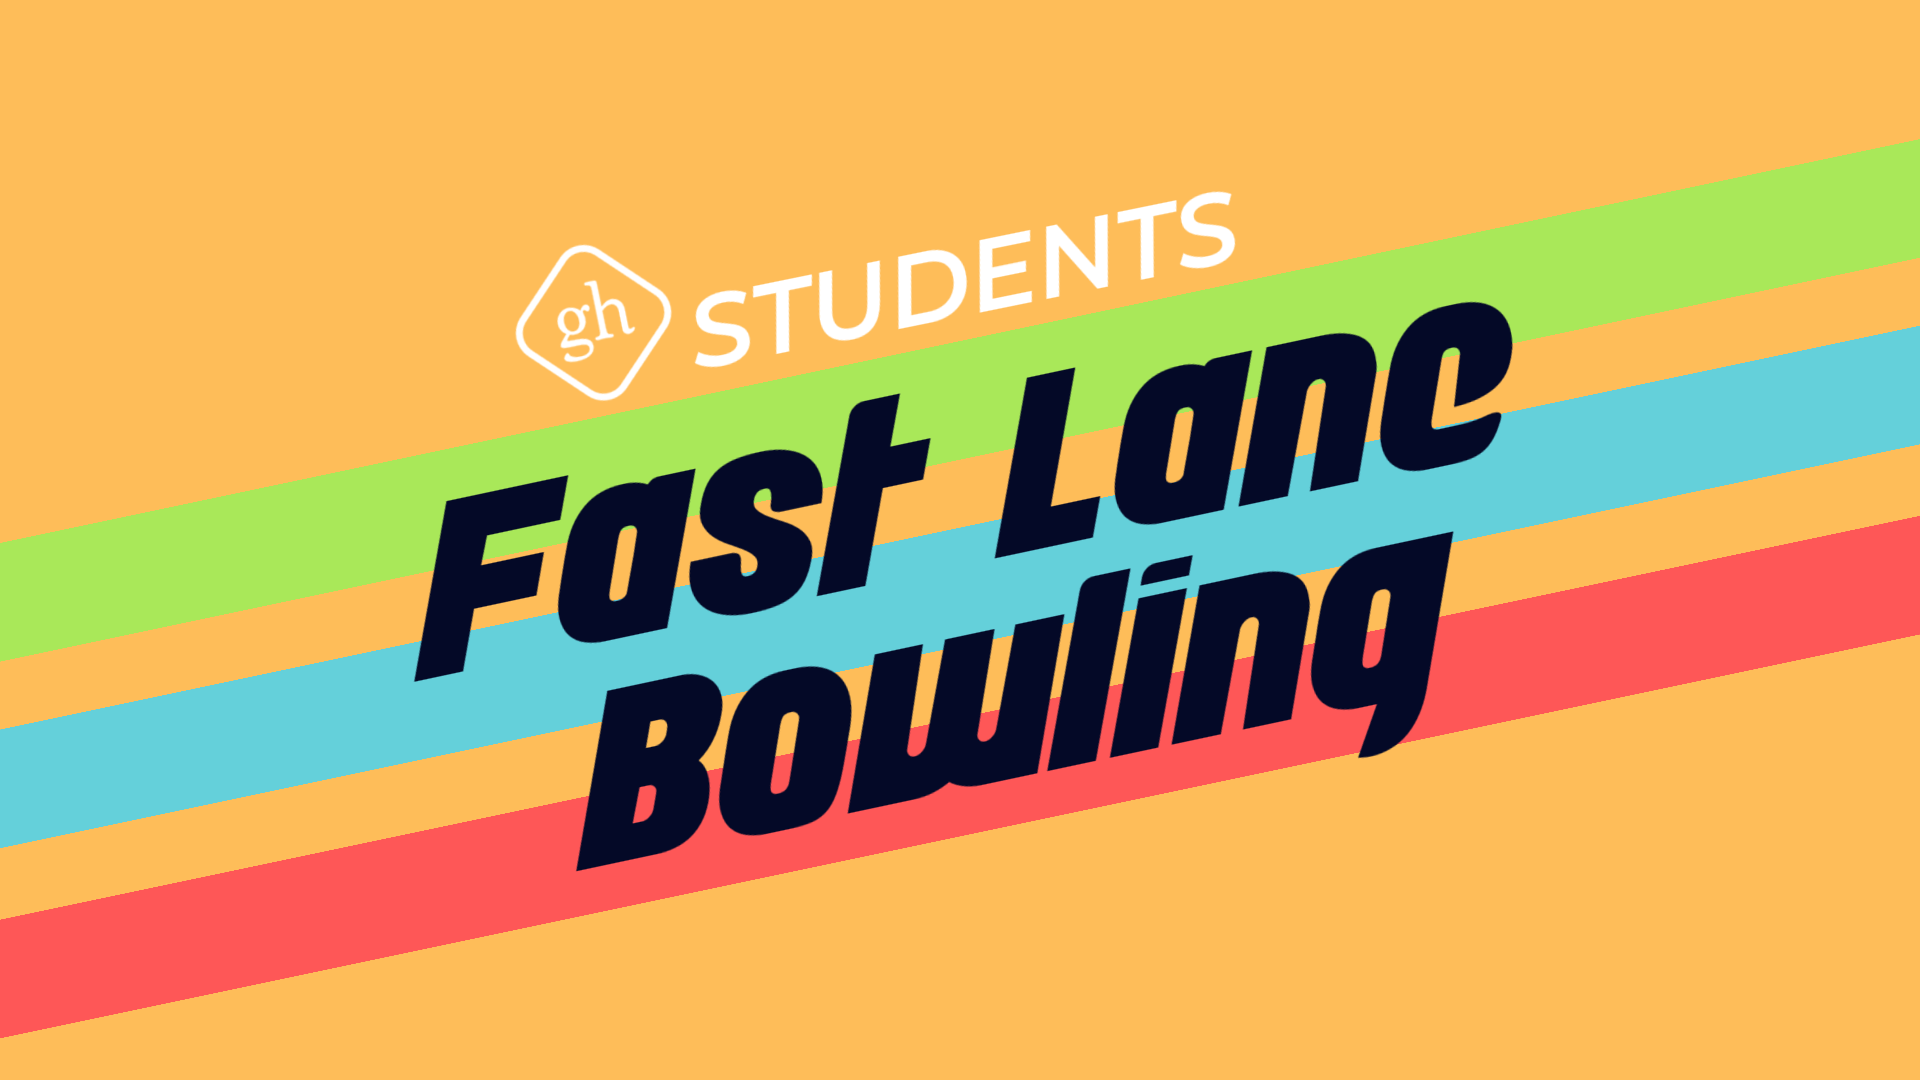 GH STUDENTS Fast Lane Bowling | July 17